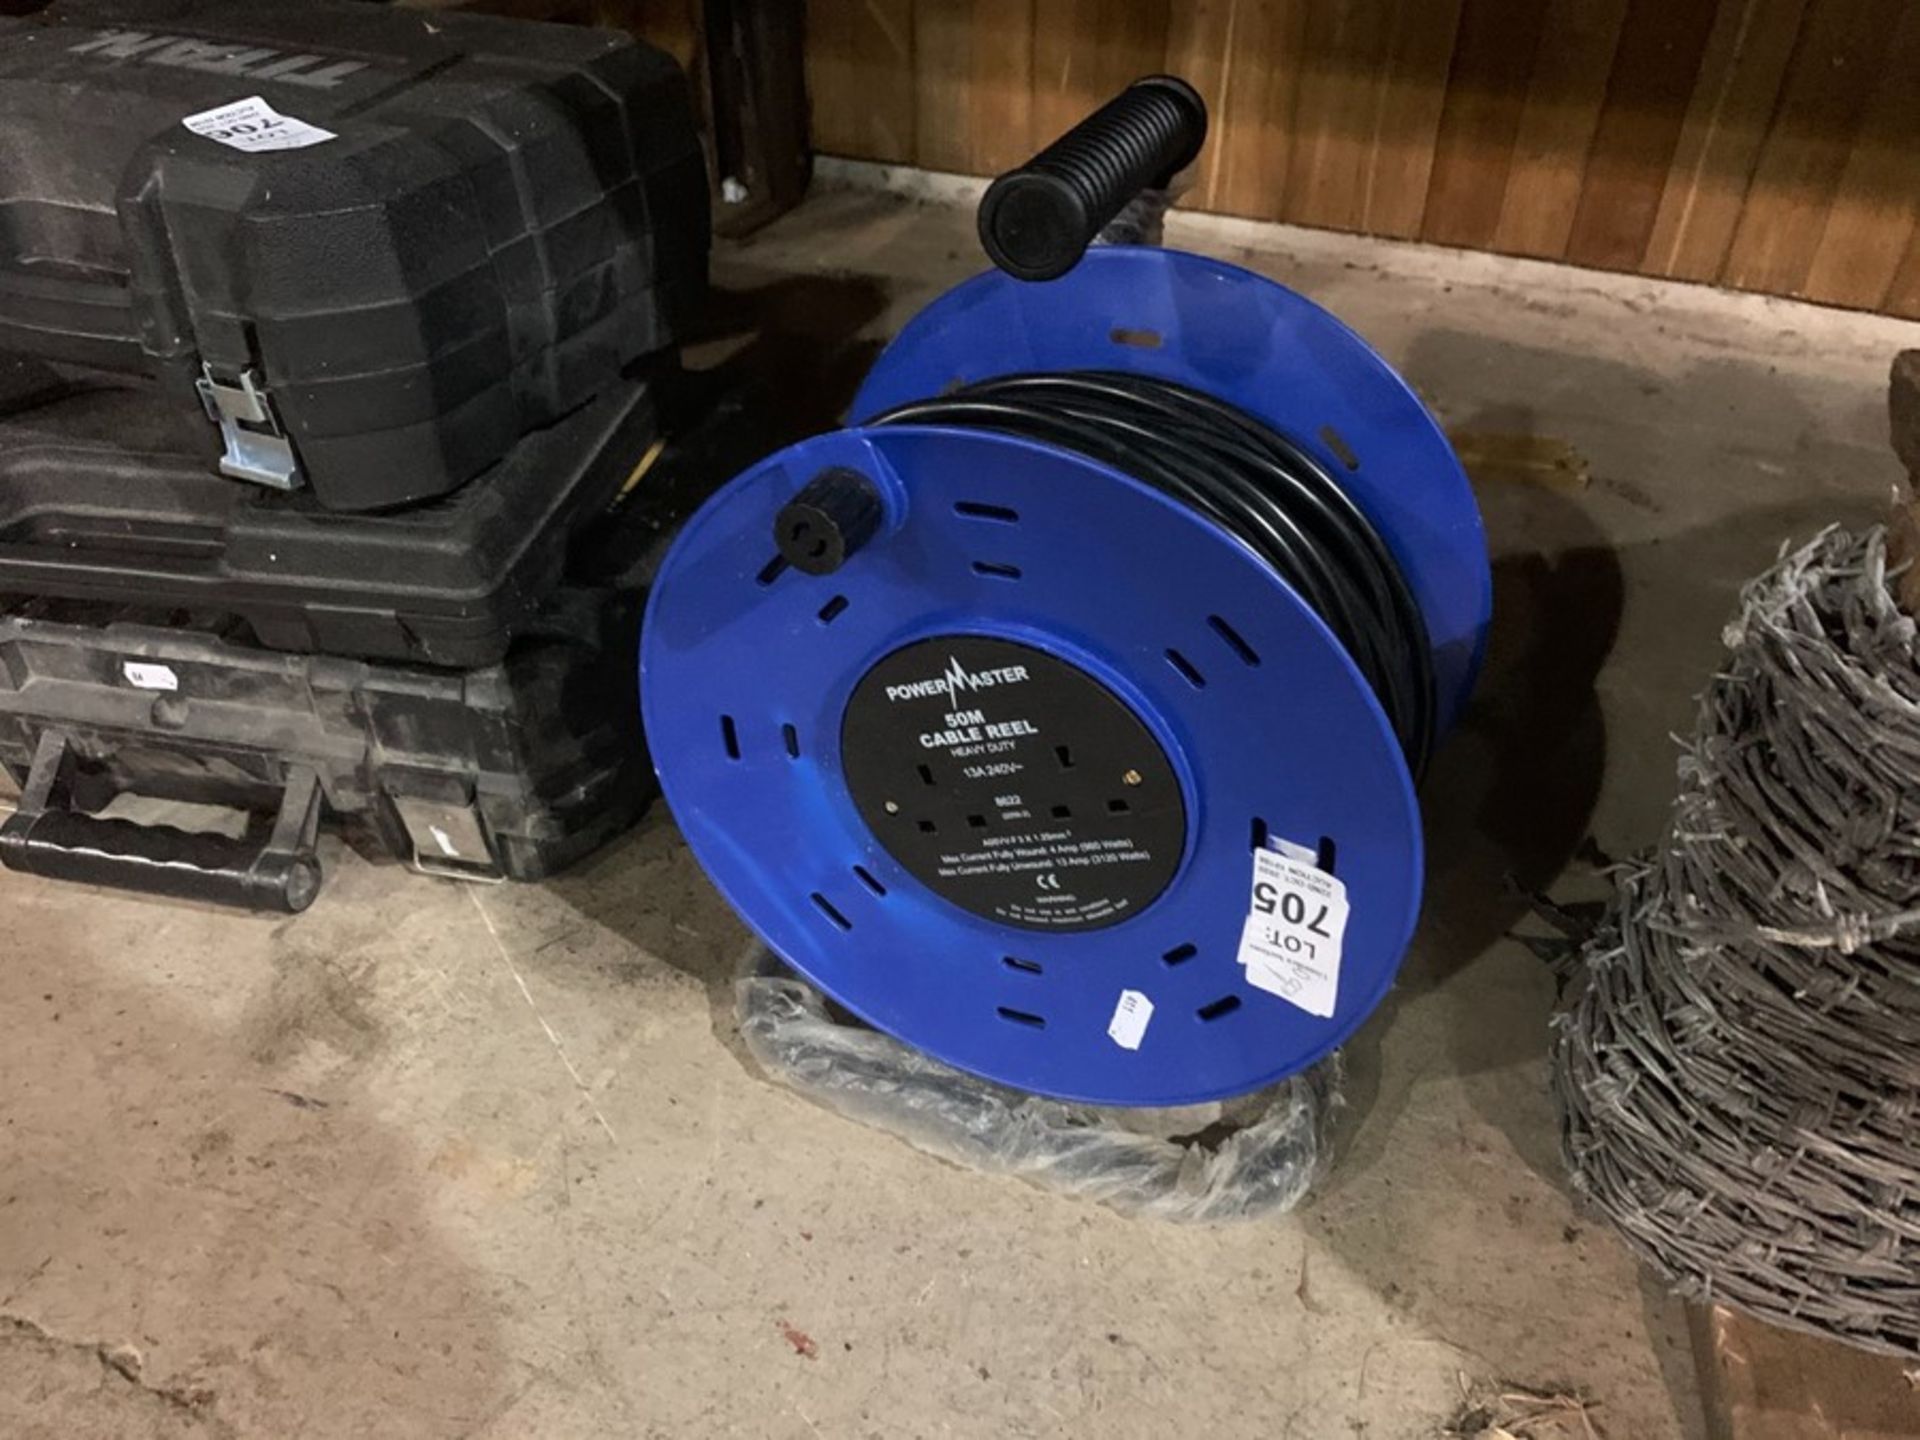 NEW 50M POWERMASTER CABLE EXTENSION REEL